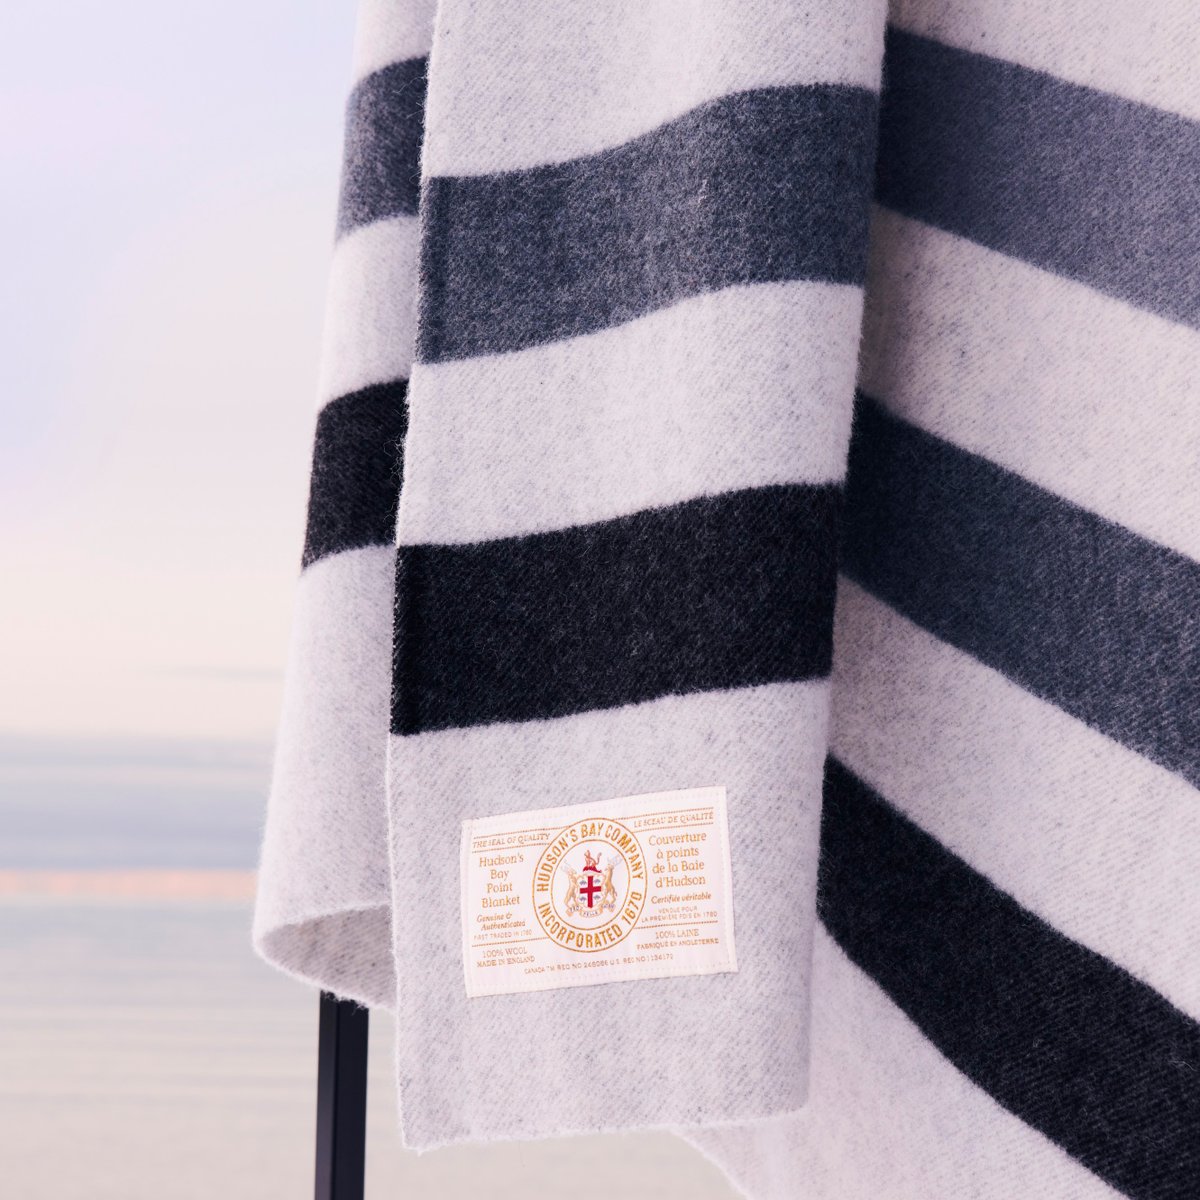 Hudsons Bay On Twitter For Our Newest Hudsons Bay Point Blanket